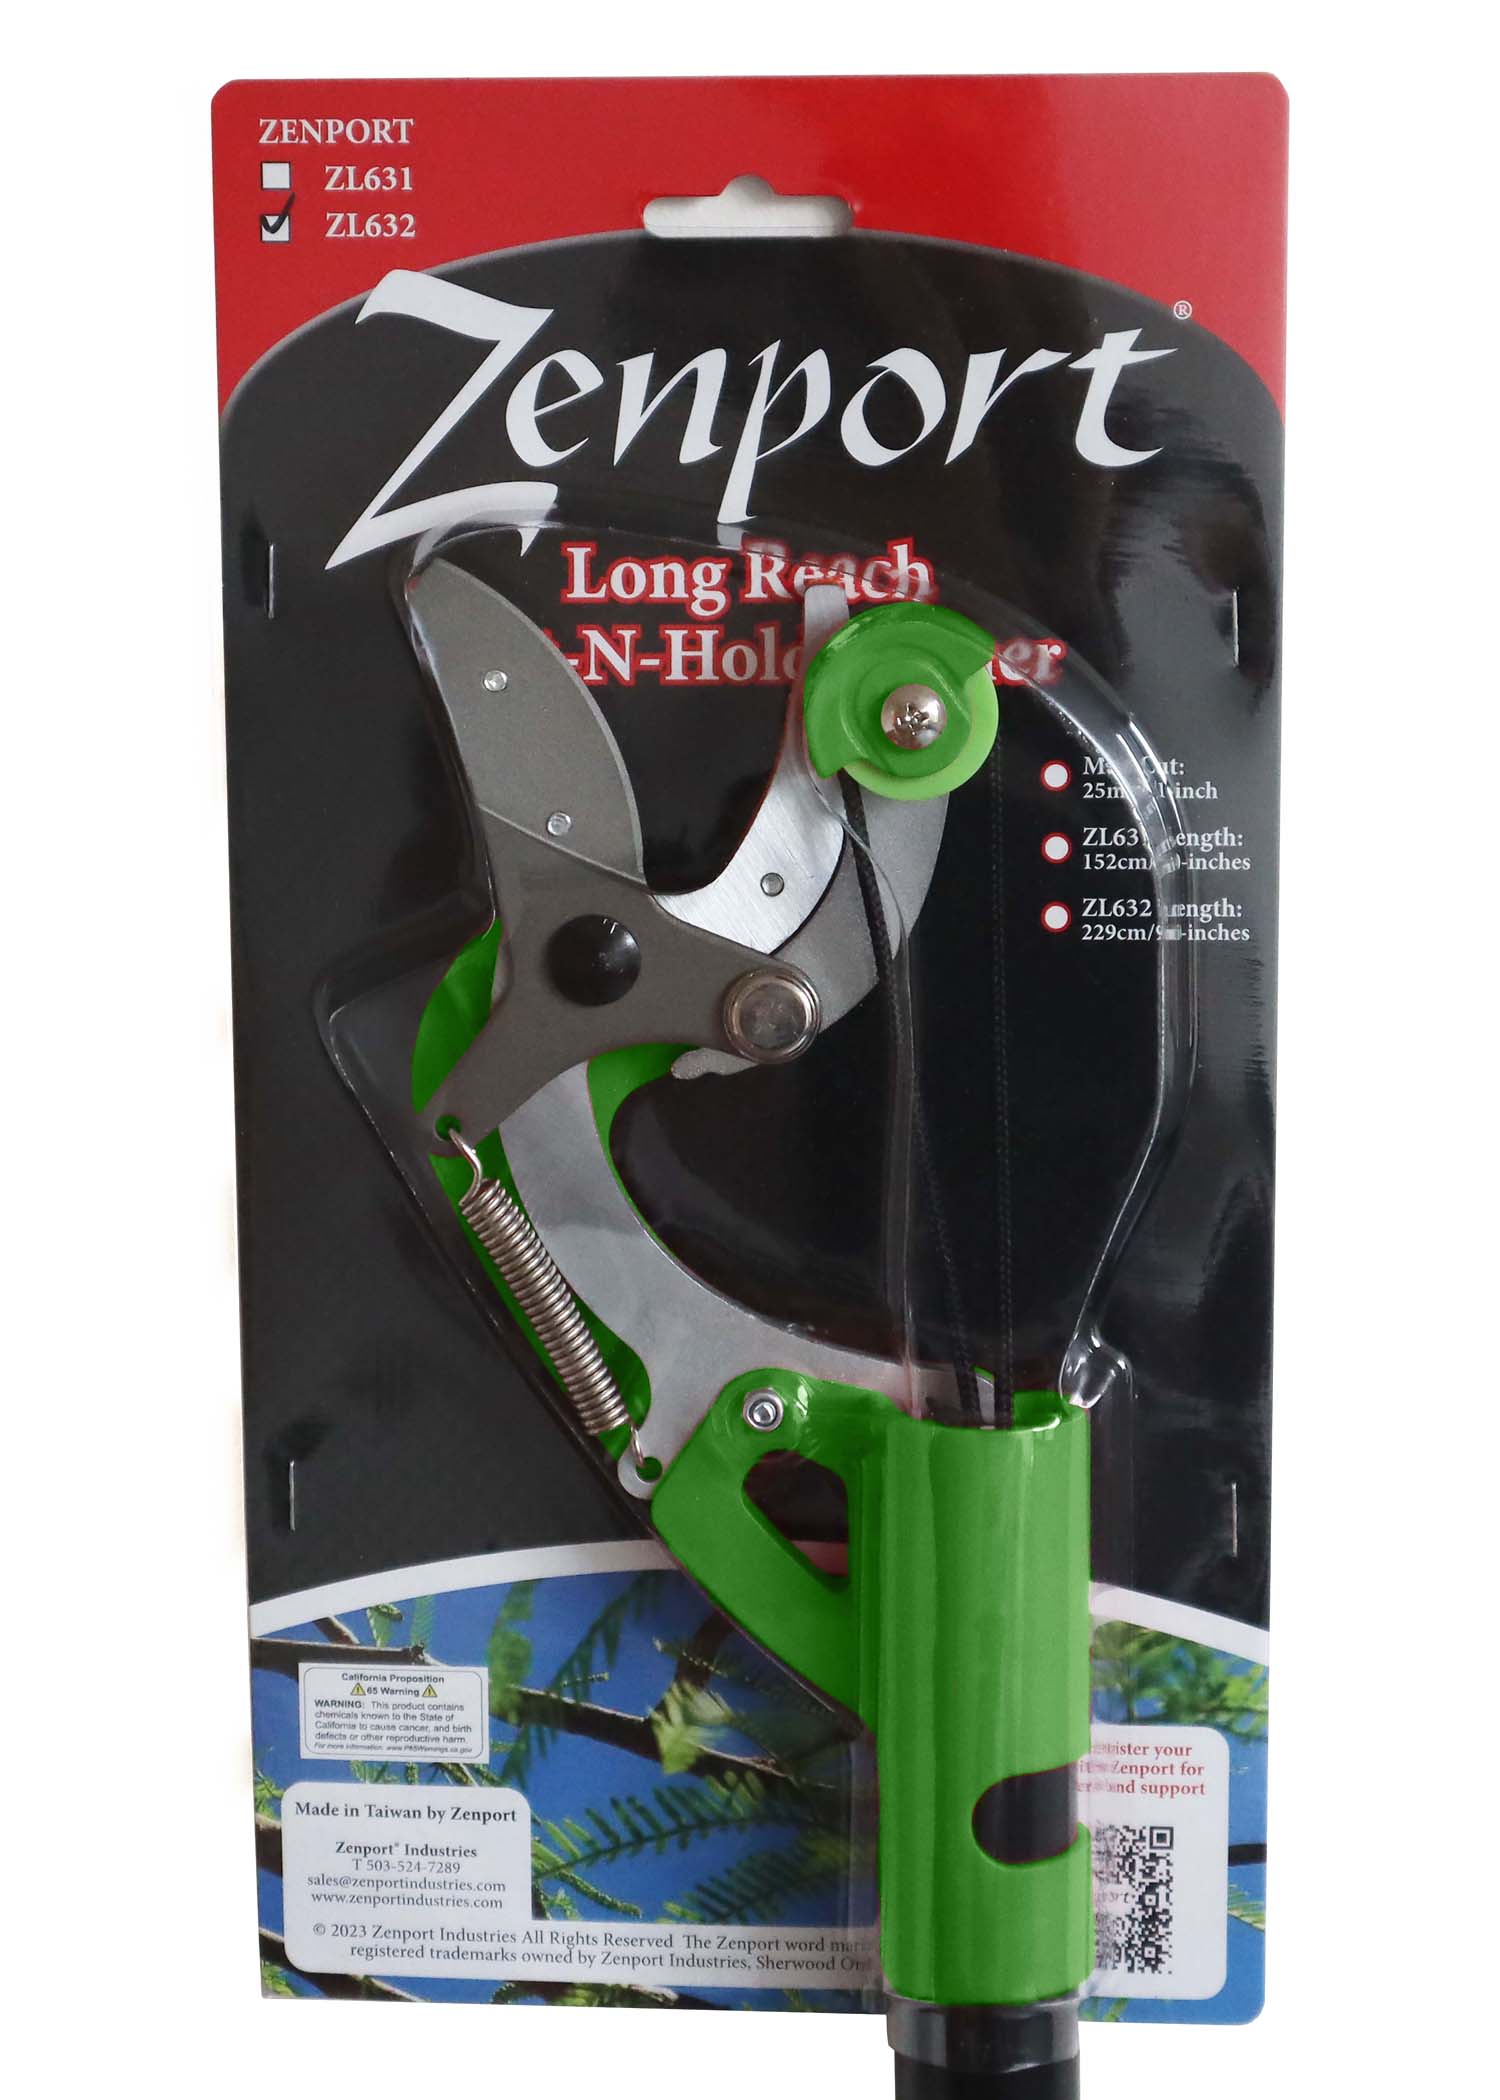 Zenport Pole Pruner ZL632 90-Inch, .5-Inch Cut, Cut-N-Hold, Pump-Action, Draw-Cord, For Pruning Fruit Trees